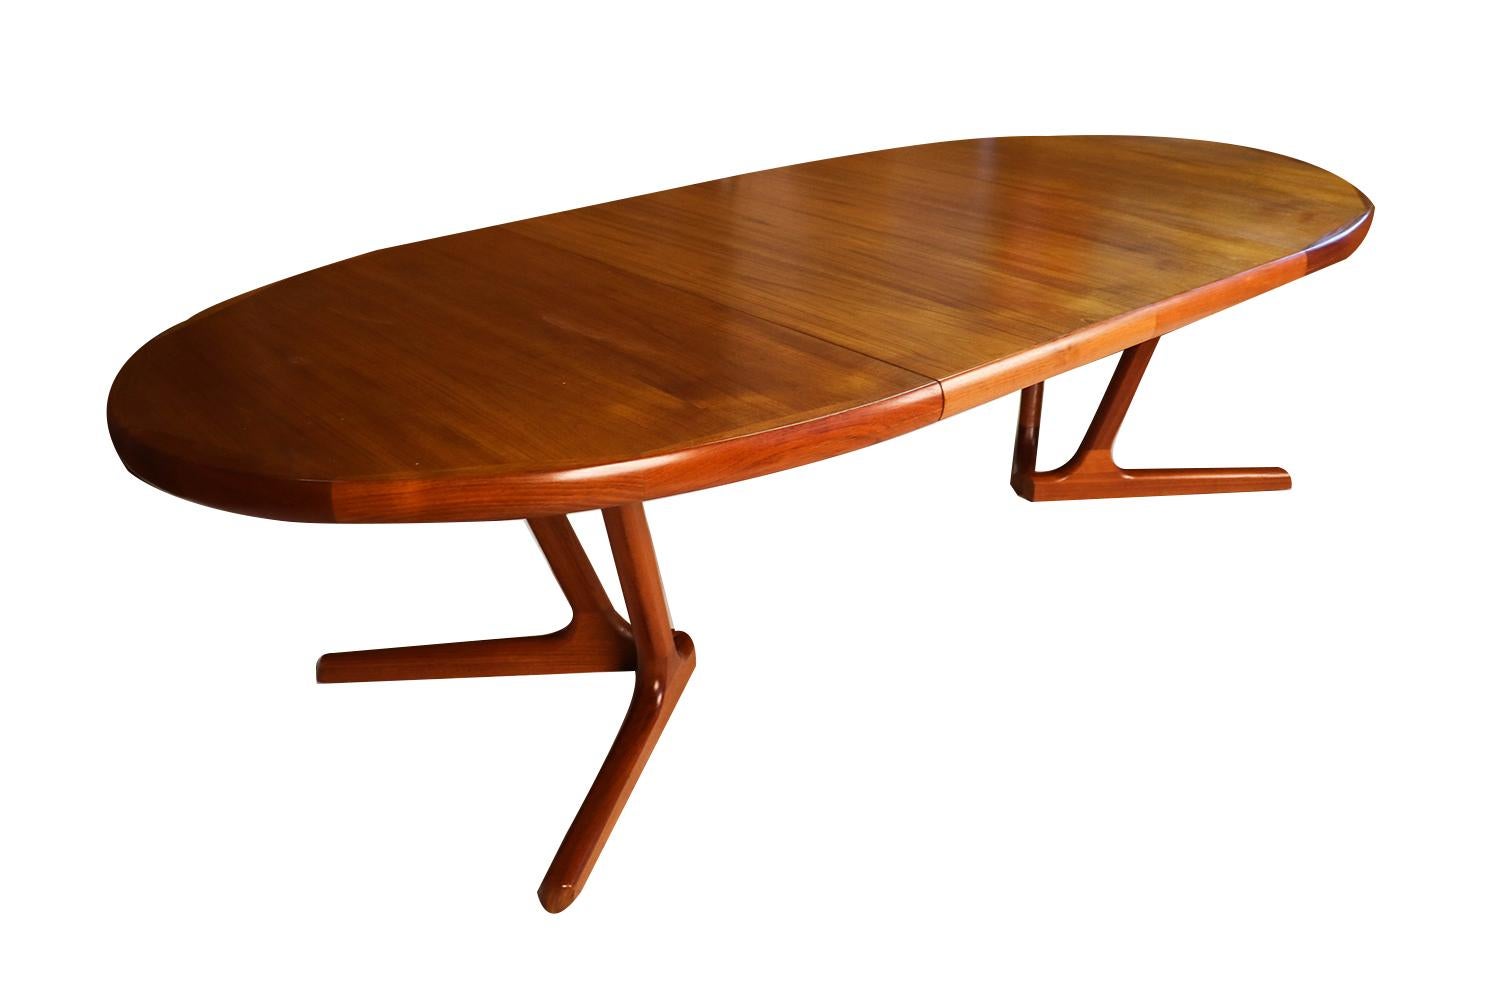 Beautiful Mid-Century Modern expandable oval dining table, manufactured by Interform collection, circa 1970s. Featuring richly grained, gleaming teak and smooth, clean lines characteristic of Classic Danish design. Makers label (Interform collection